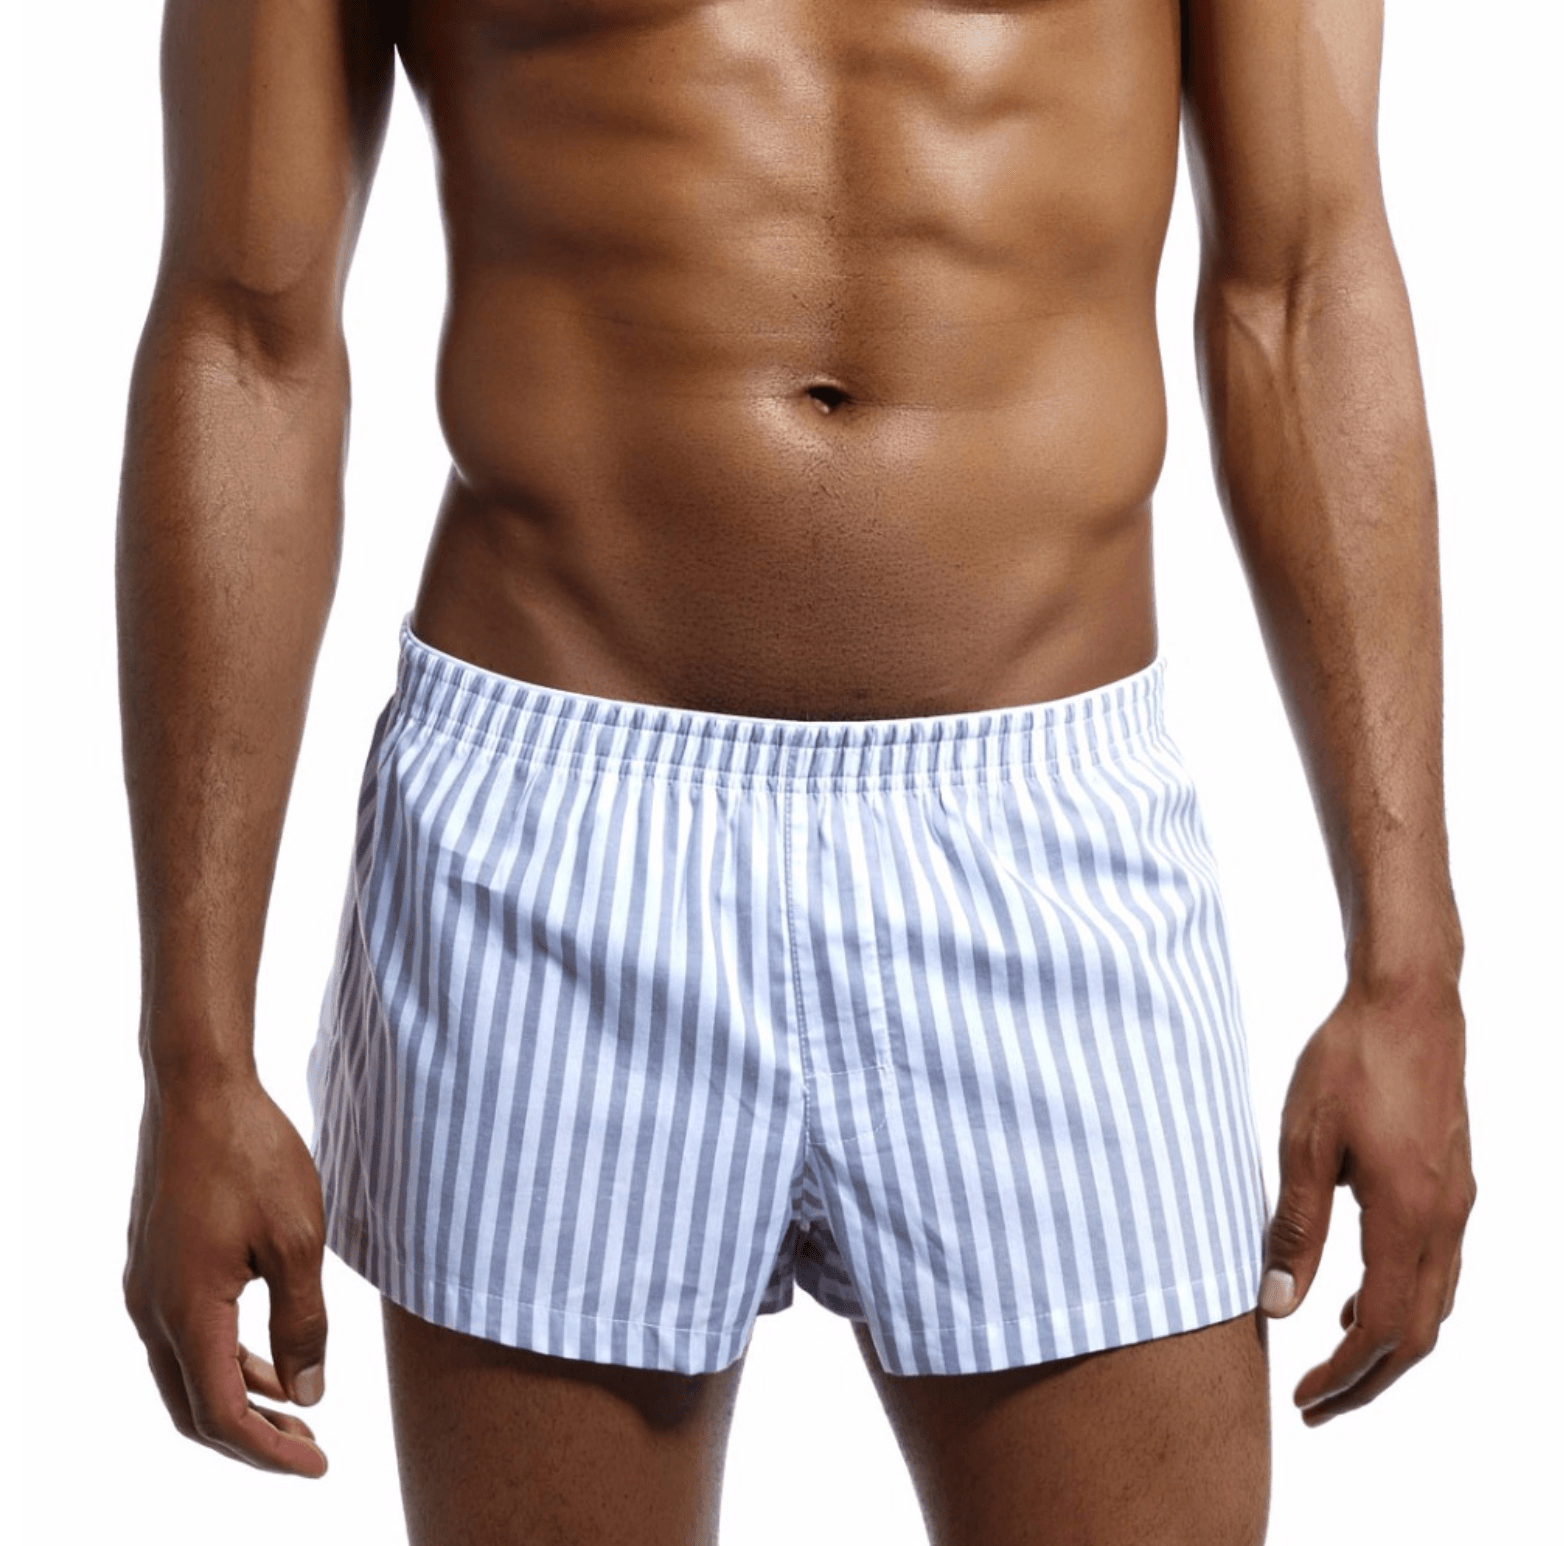 Cute Striped Boxer Shorts/Underwear - Gays+ Store